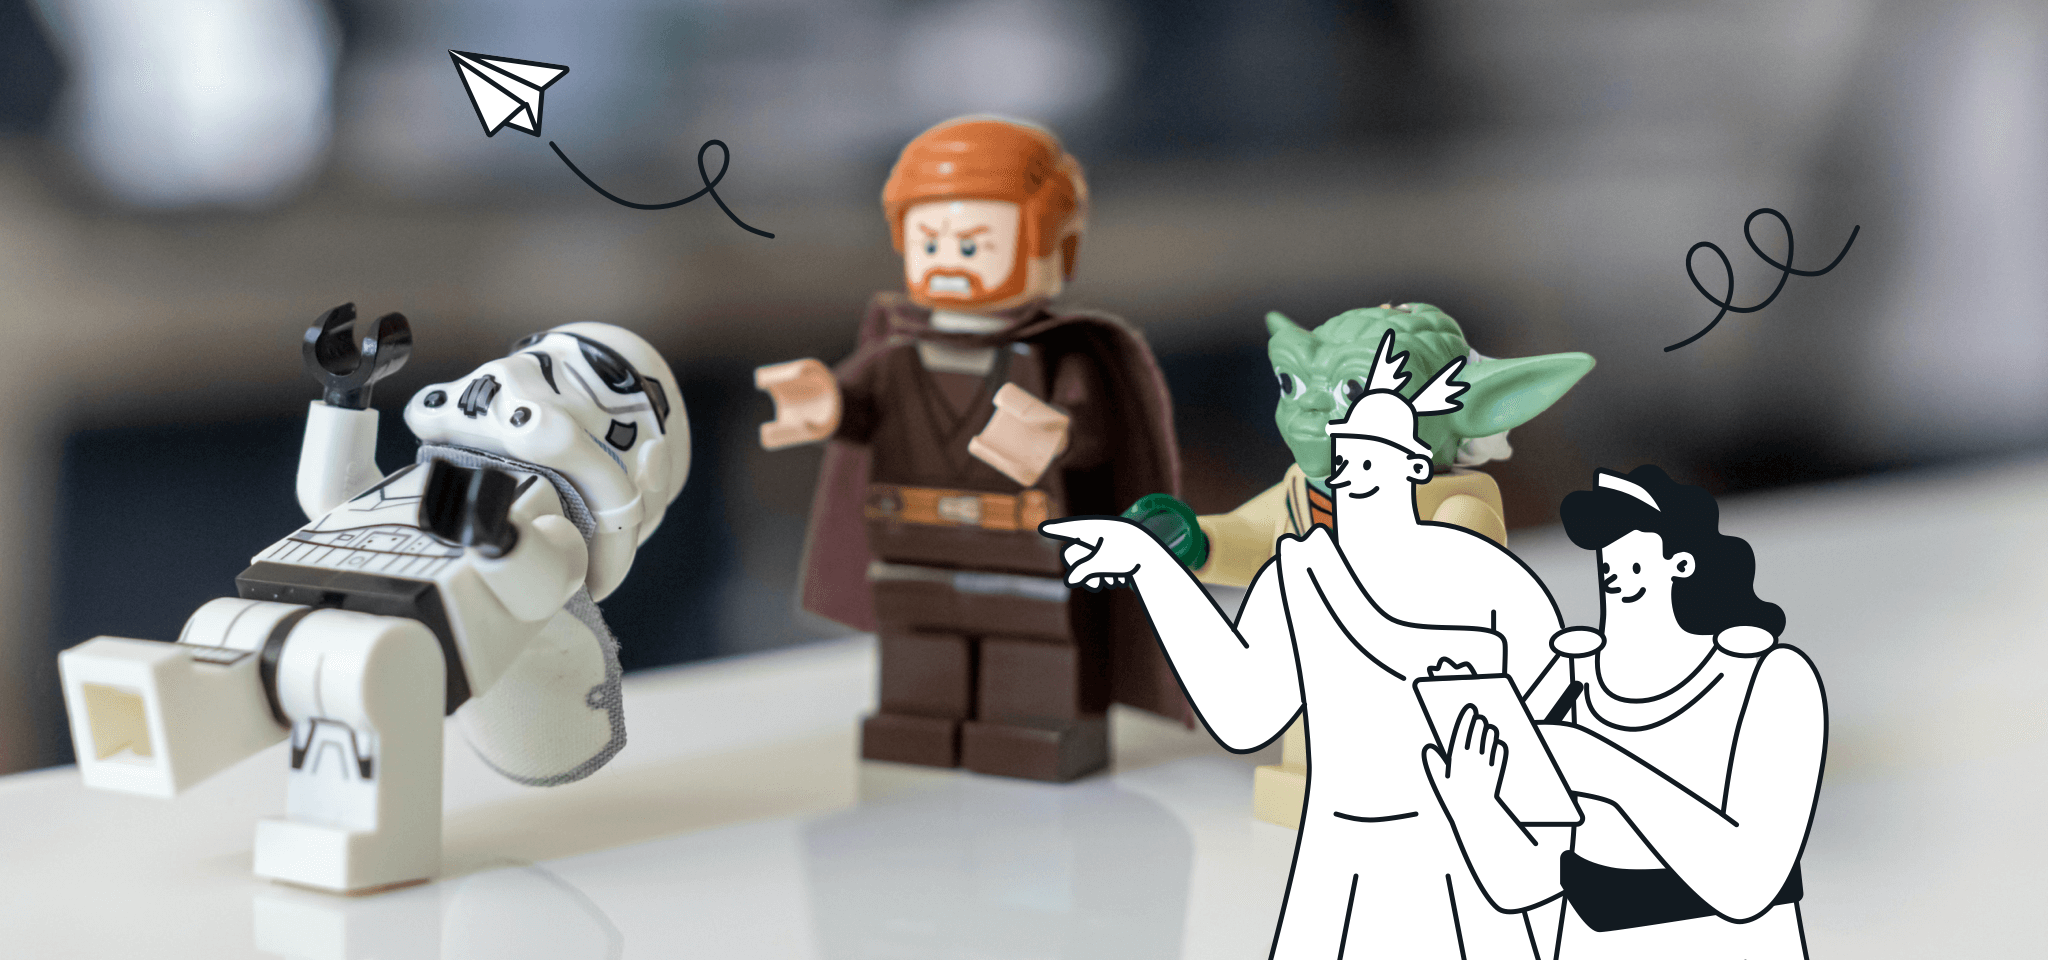 Hermes and Hera with Star Wars legos